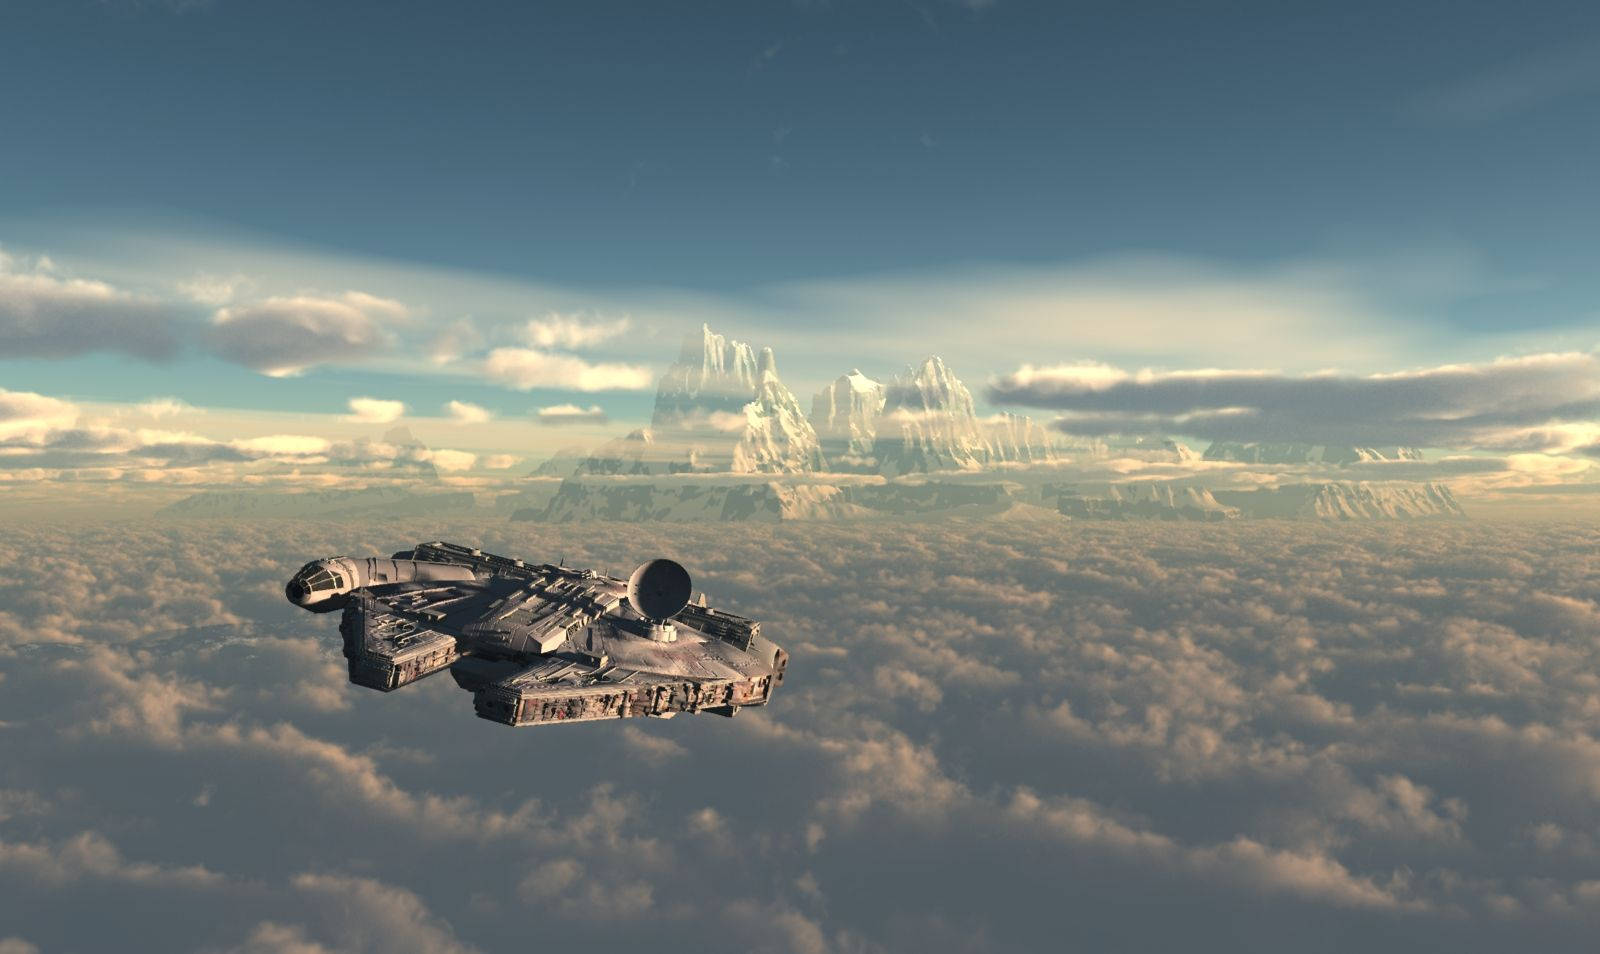 Explore an Entirely New World on a Star Wars Adventure Wallpaper